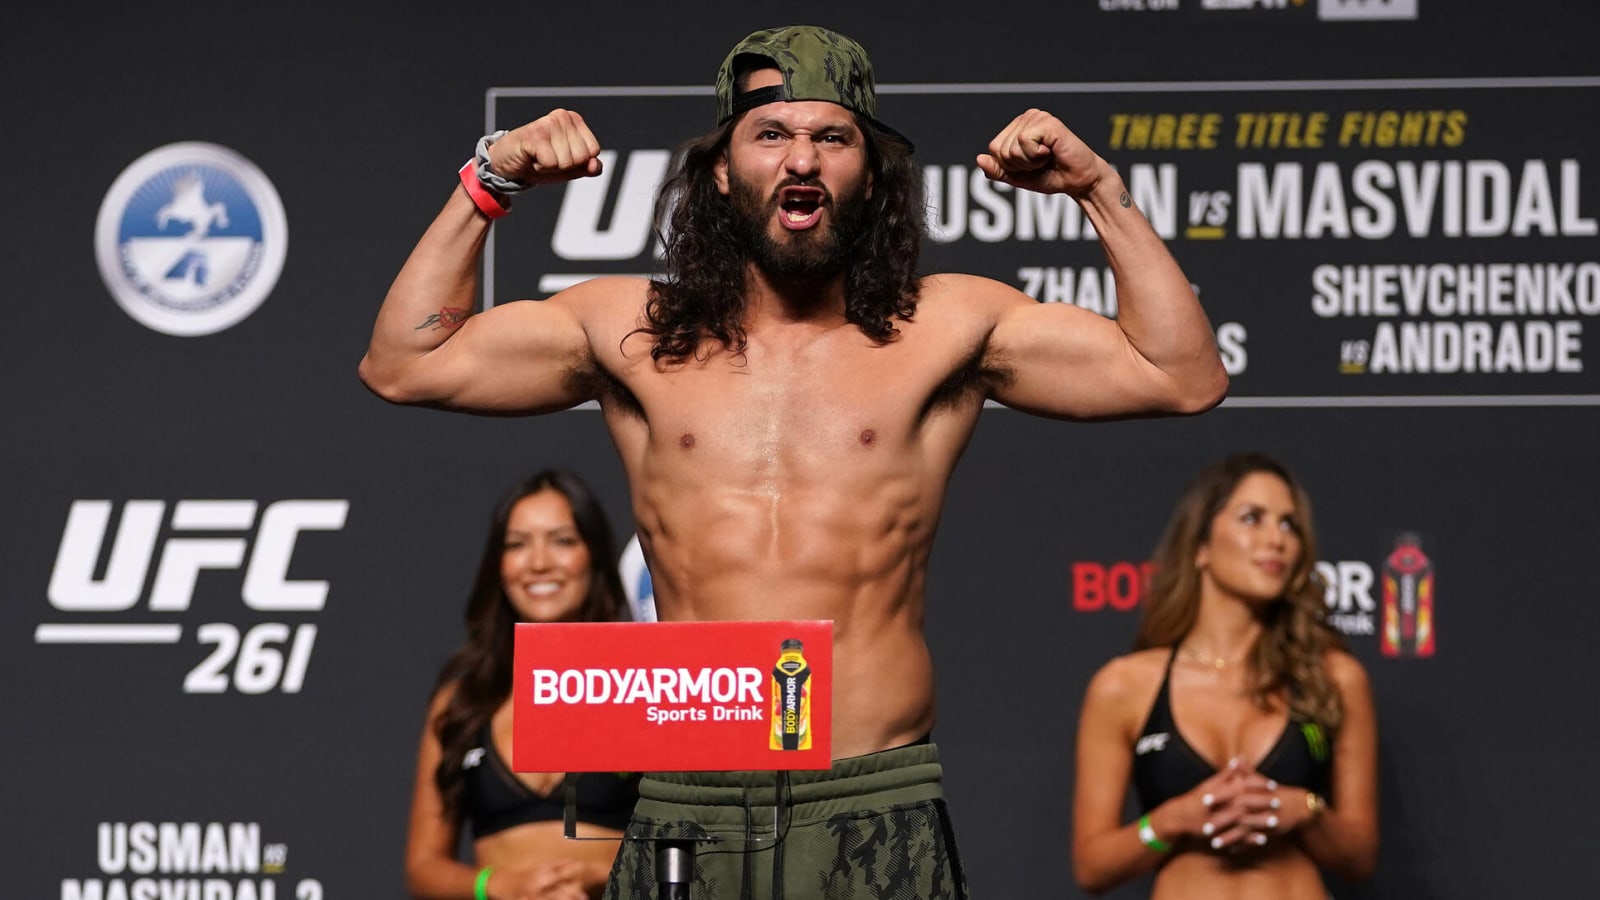 Masvidal's deal makes him one of UFC's highest-paid fighters